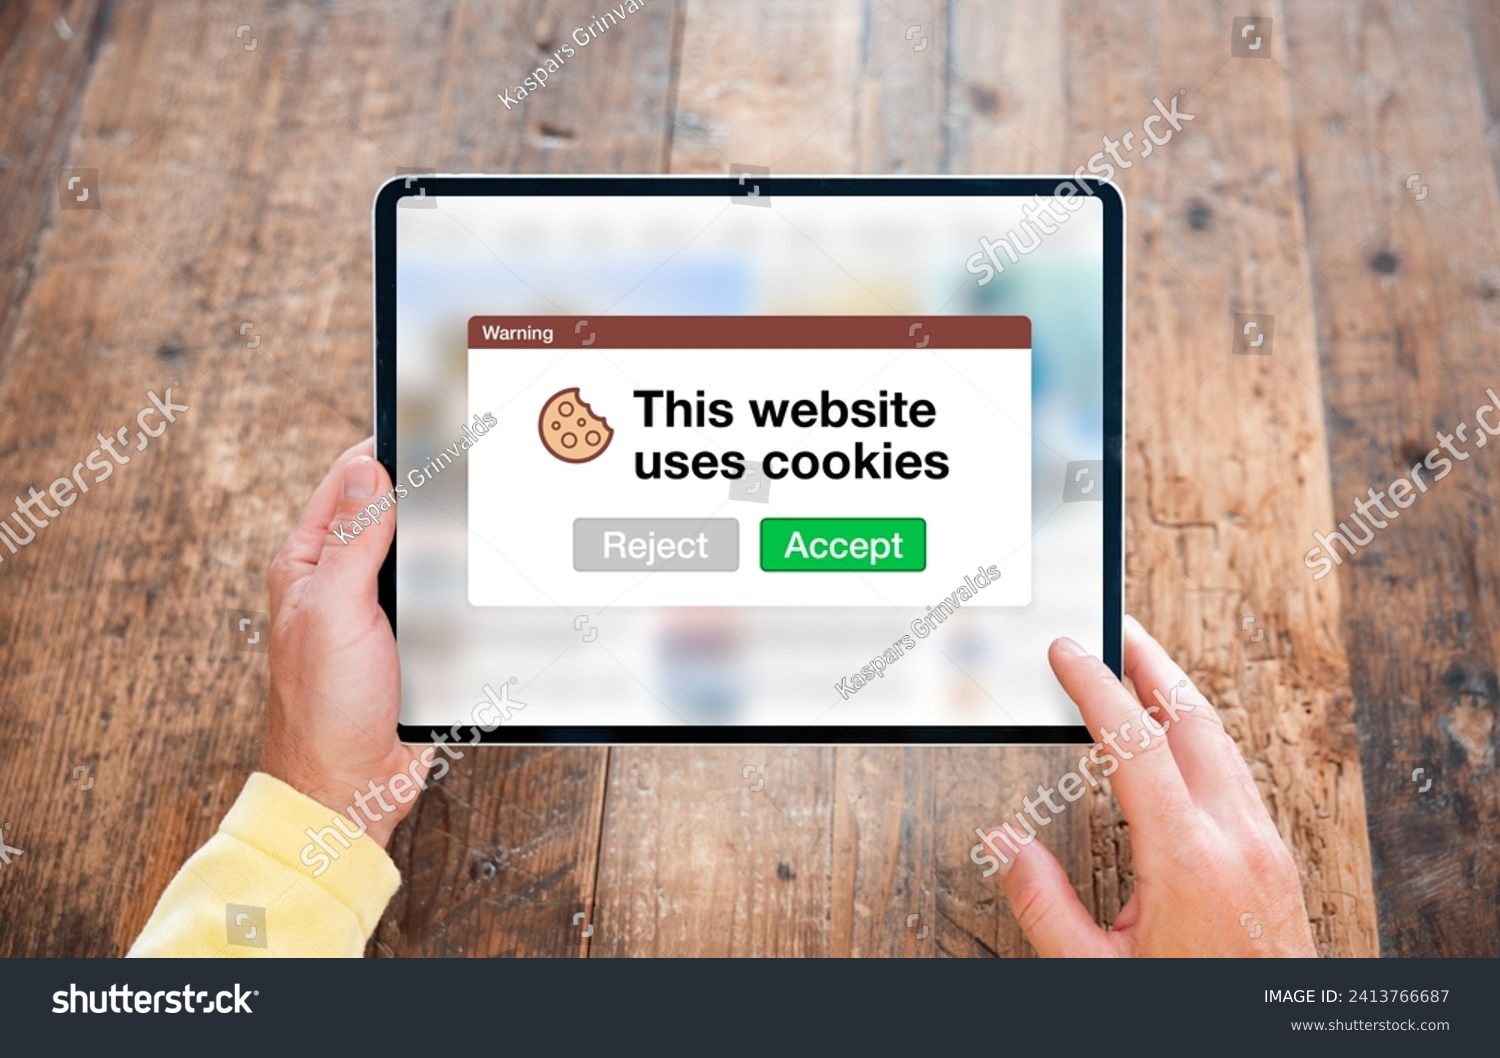 This website uses cookies warning pop-up window on tablet's internet browser #2413766687